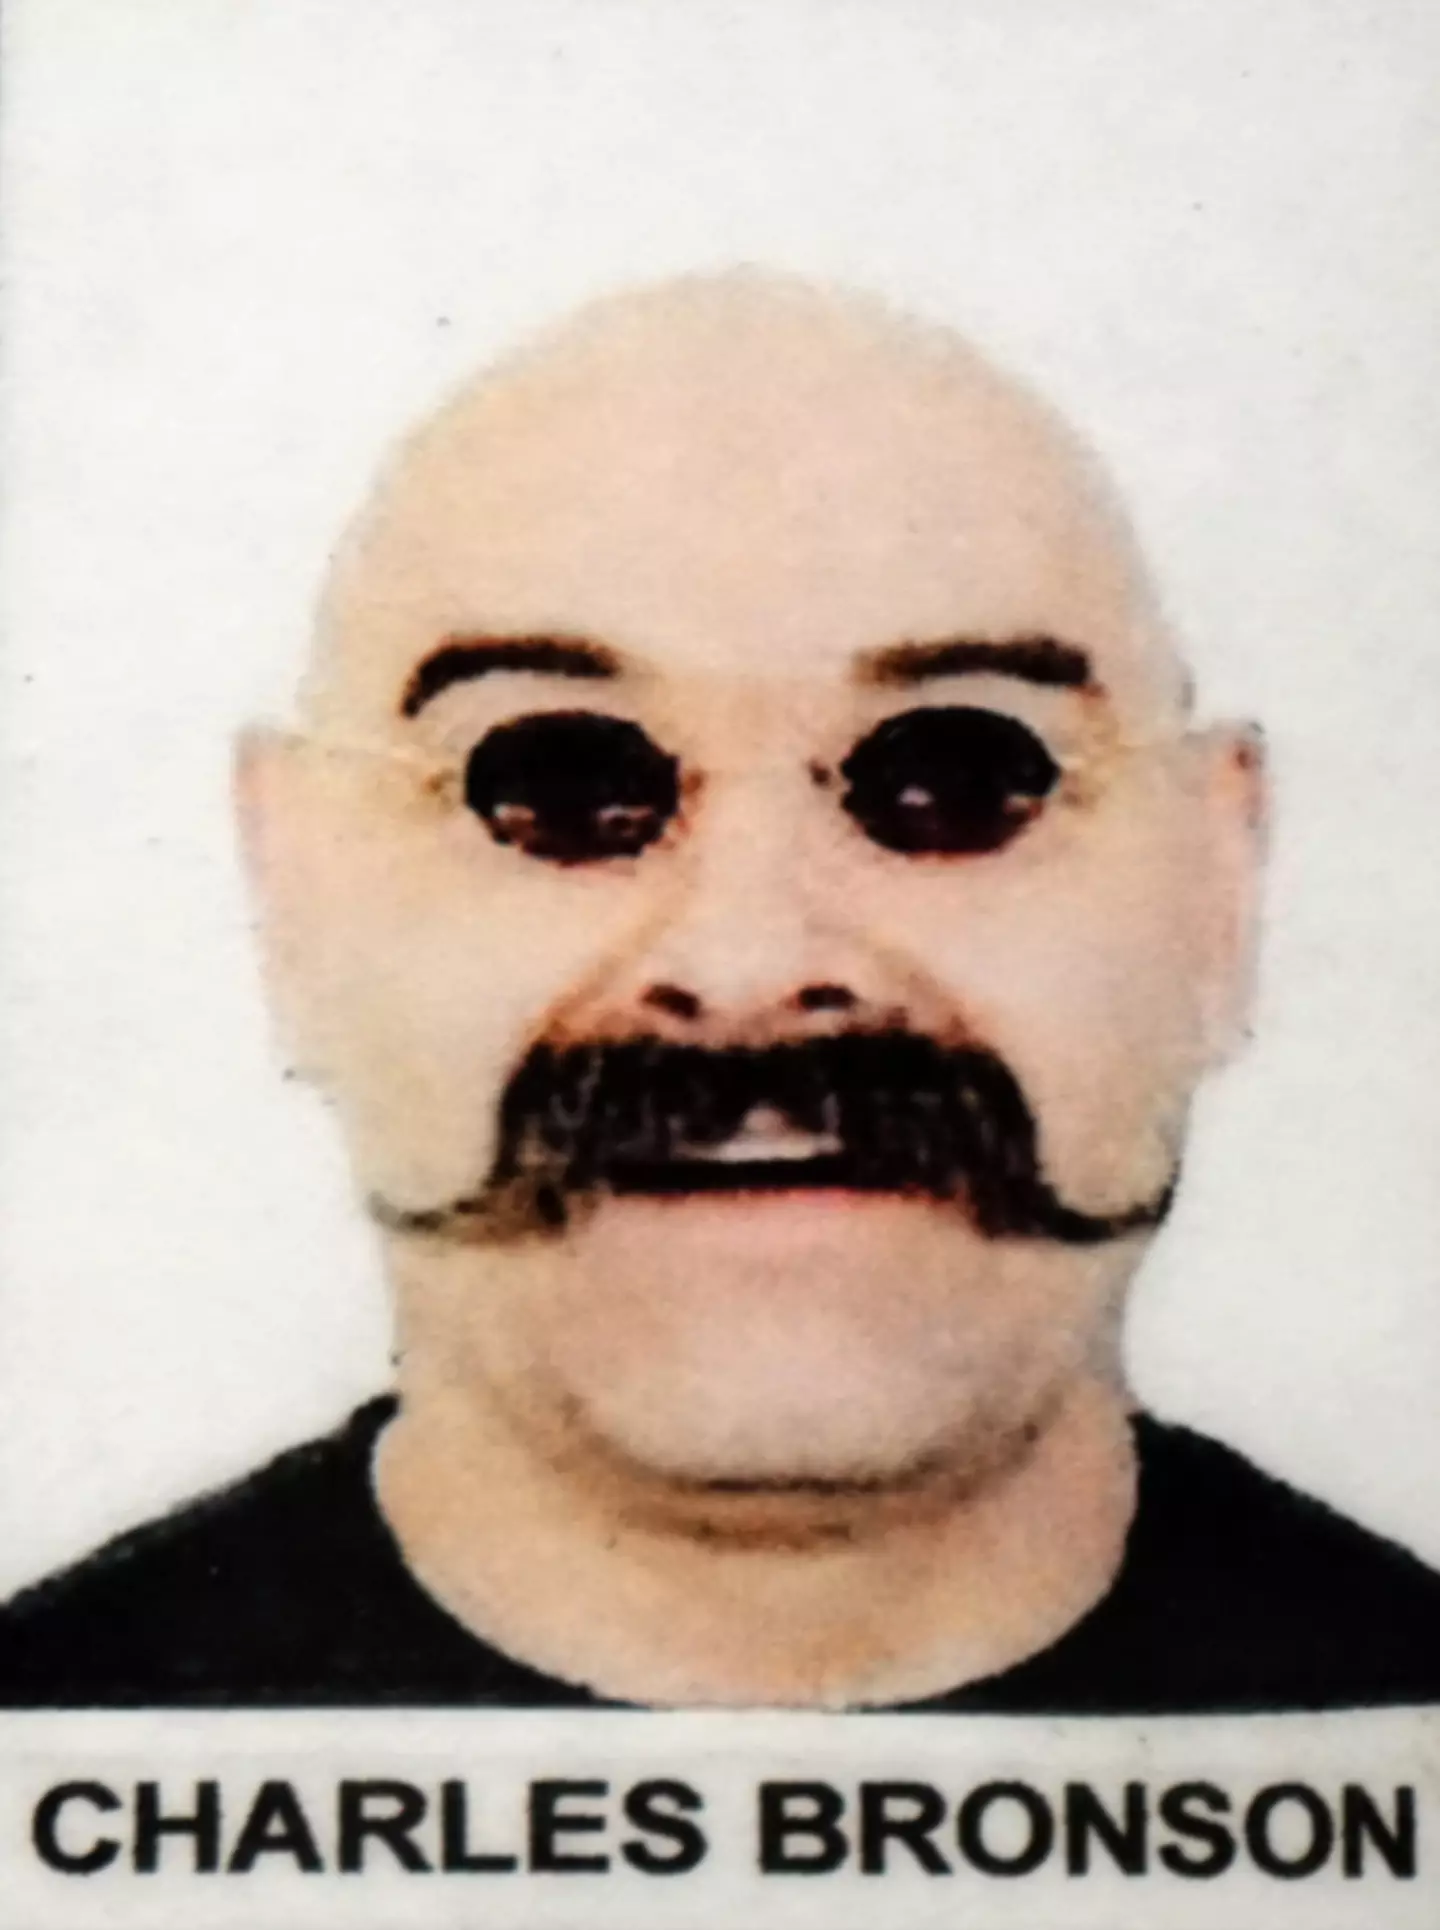 Charles Bronson could be released from prison as early as 2023.